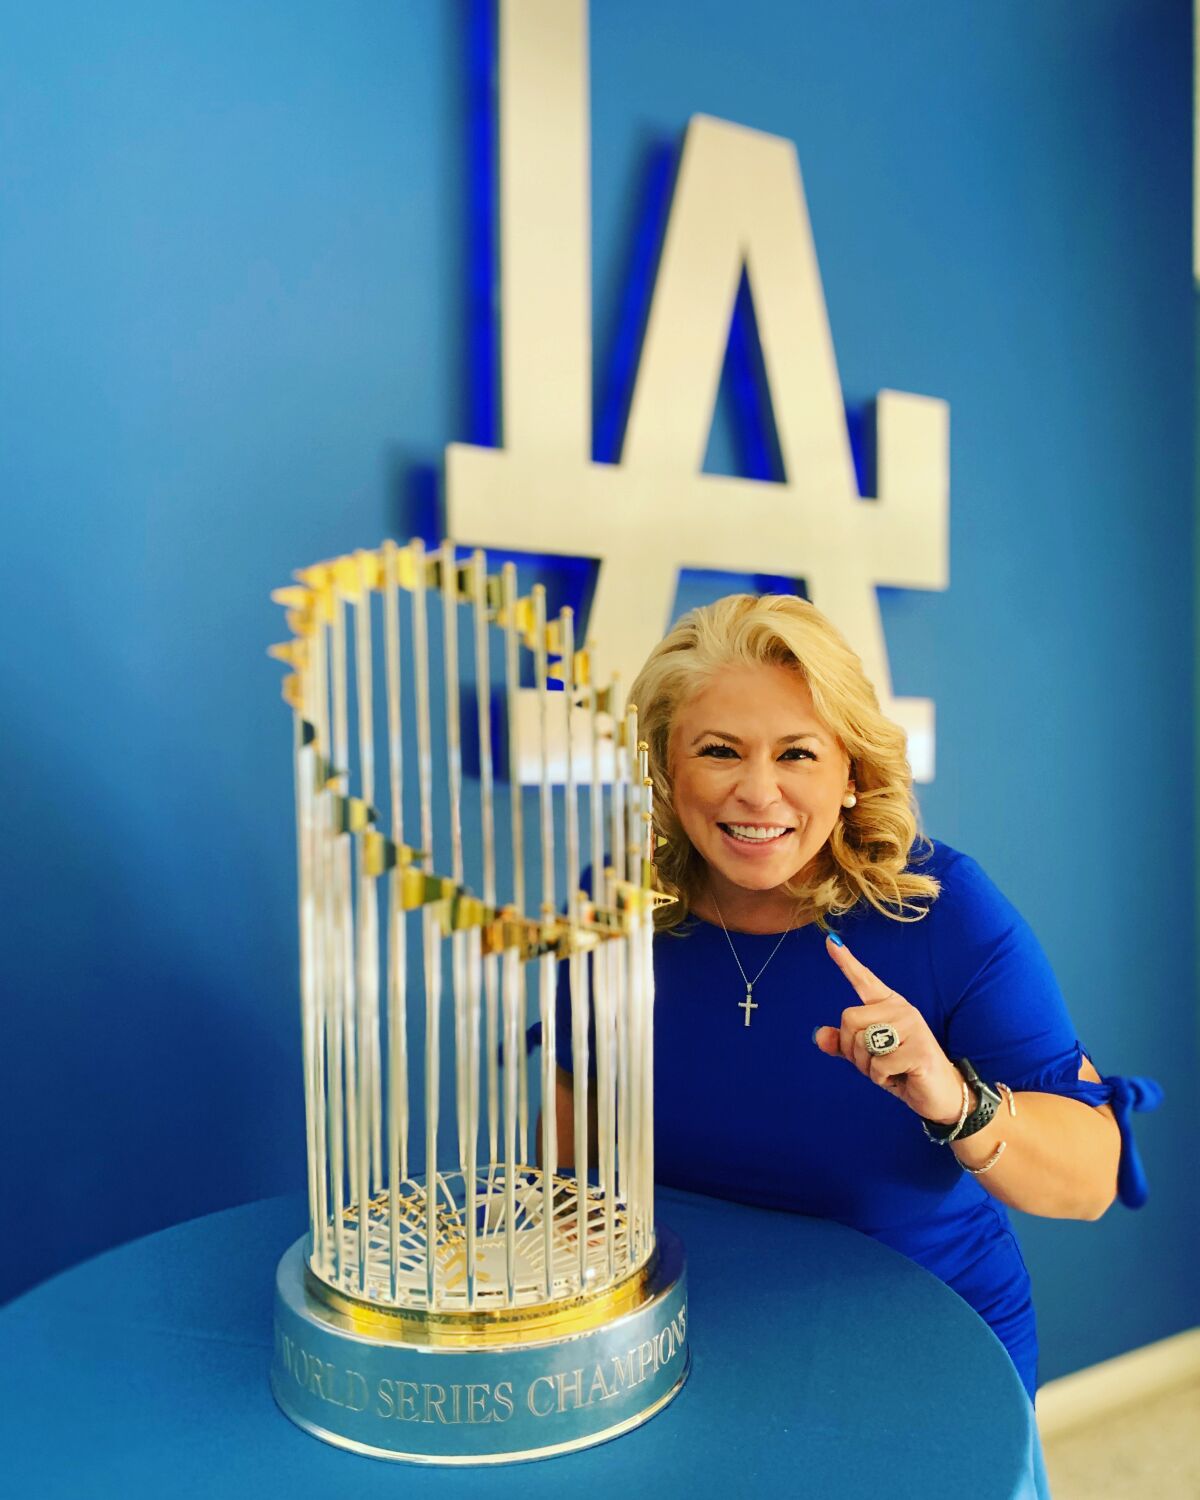 Dodgers vice president of community relations Naomi Rodriguez poses with the freshly won Commissioner's Trophy